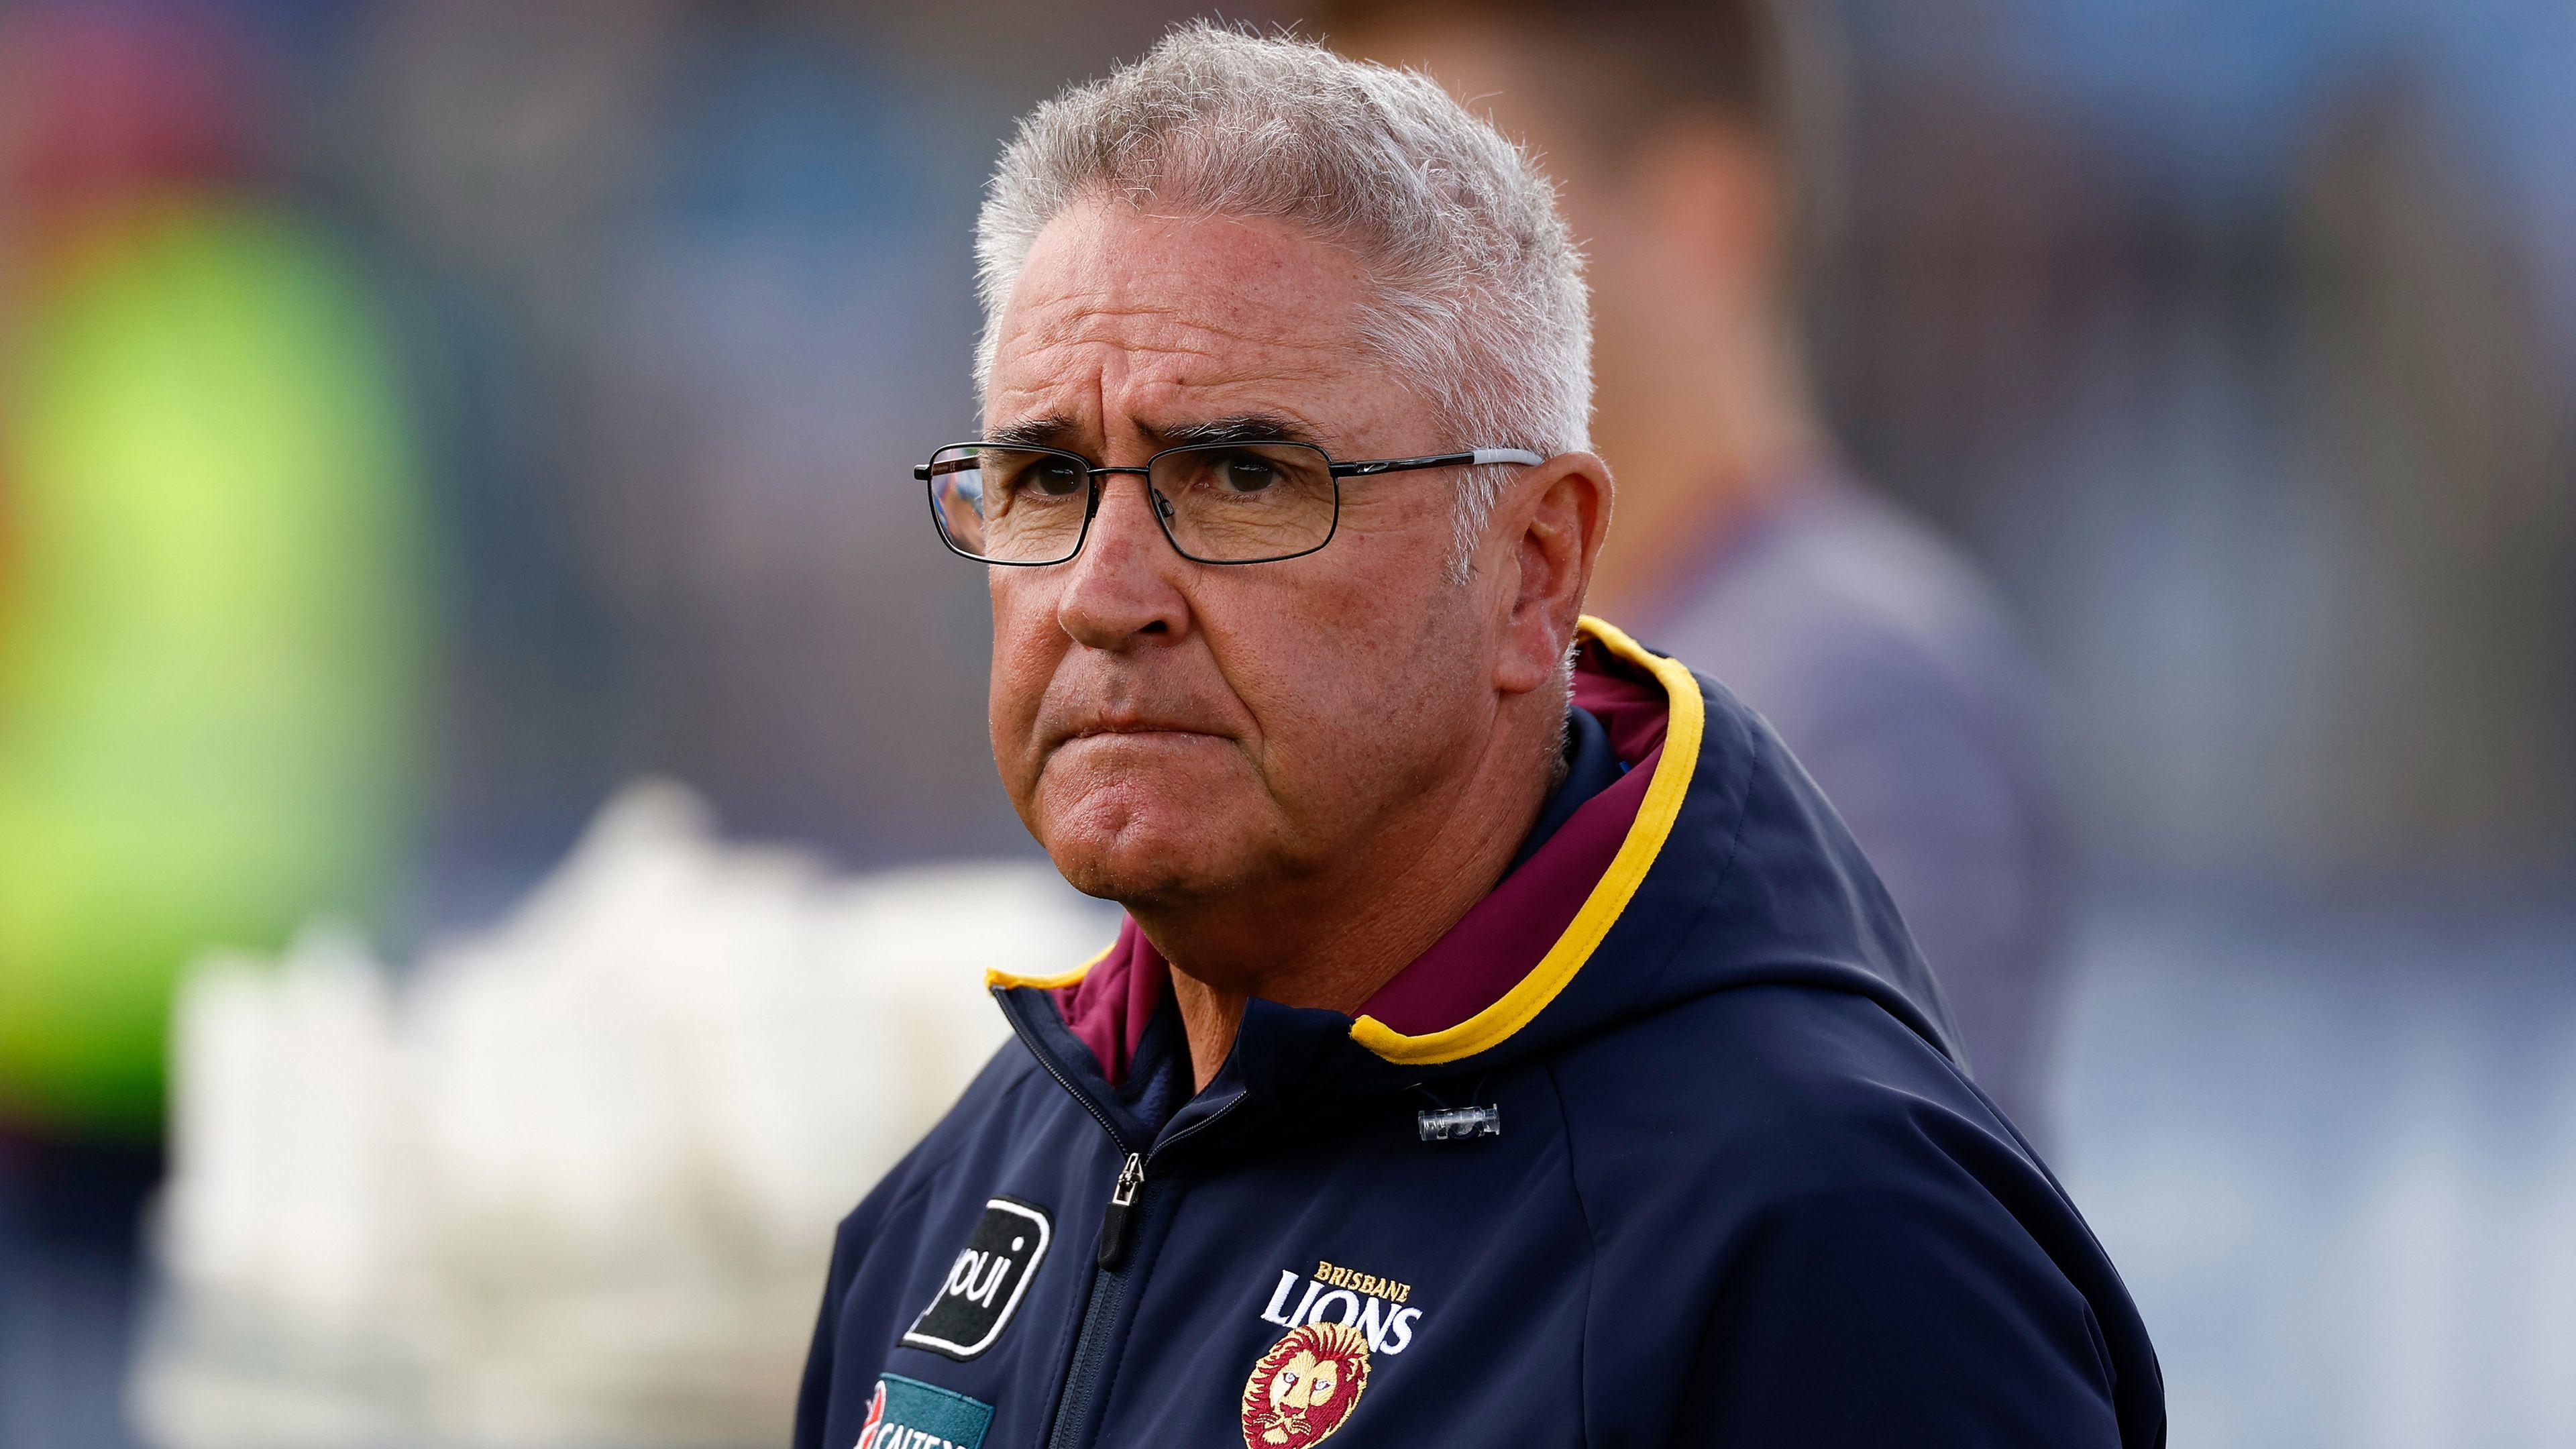 Brisbane coach Chris Fagan rips 'inaccurate' reports questioning mediation attendance